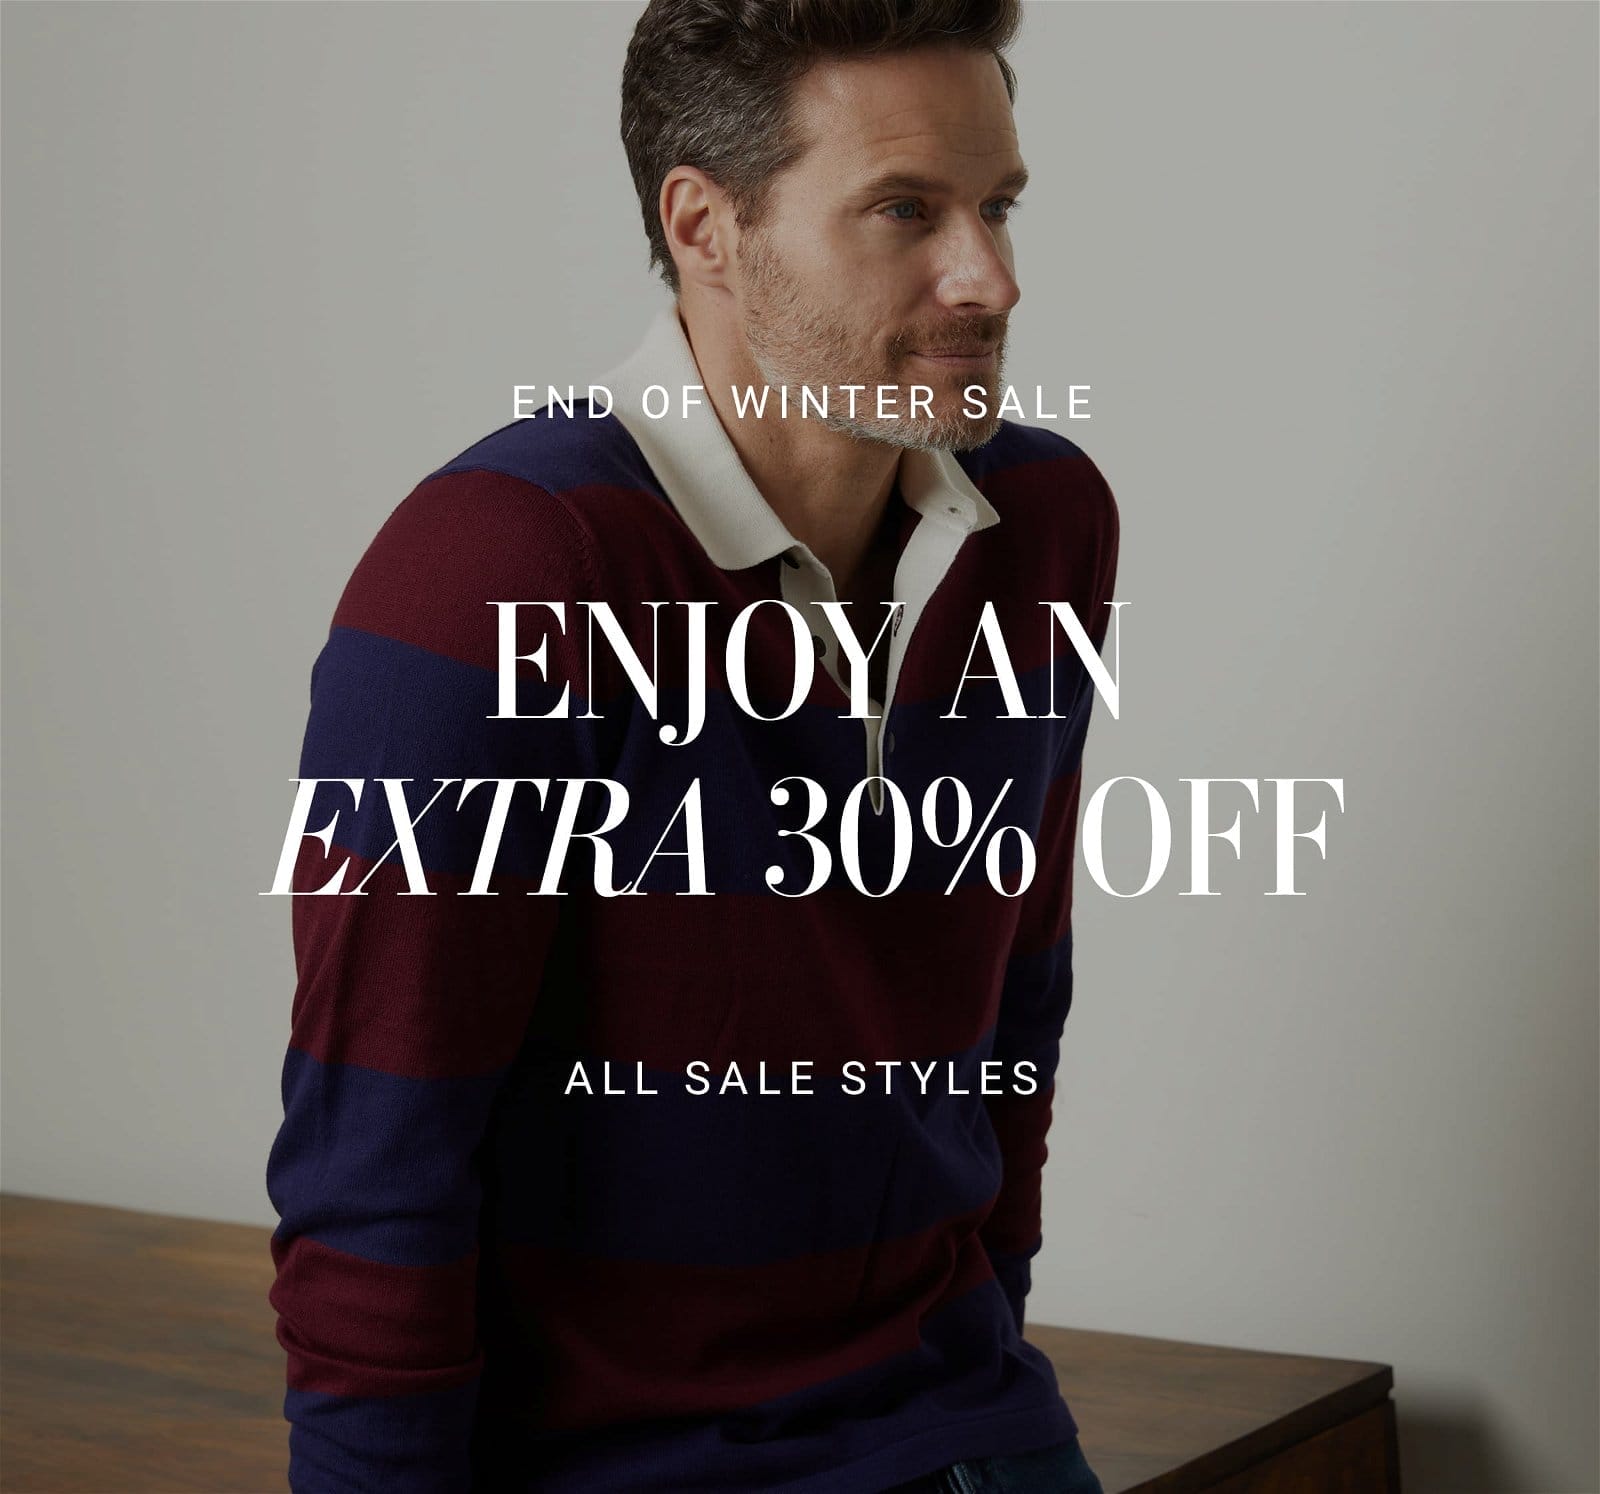 END OF WINTER SALE. ENJOY AN EXTRA 30% OFF. ALL SALE STYLES